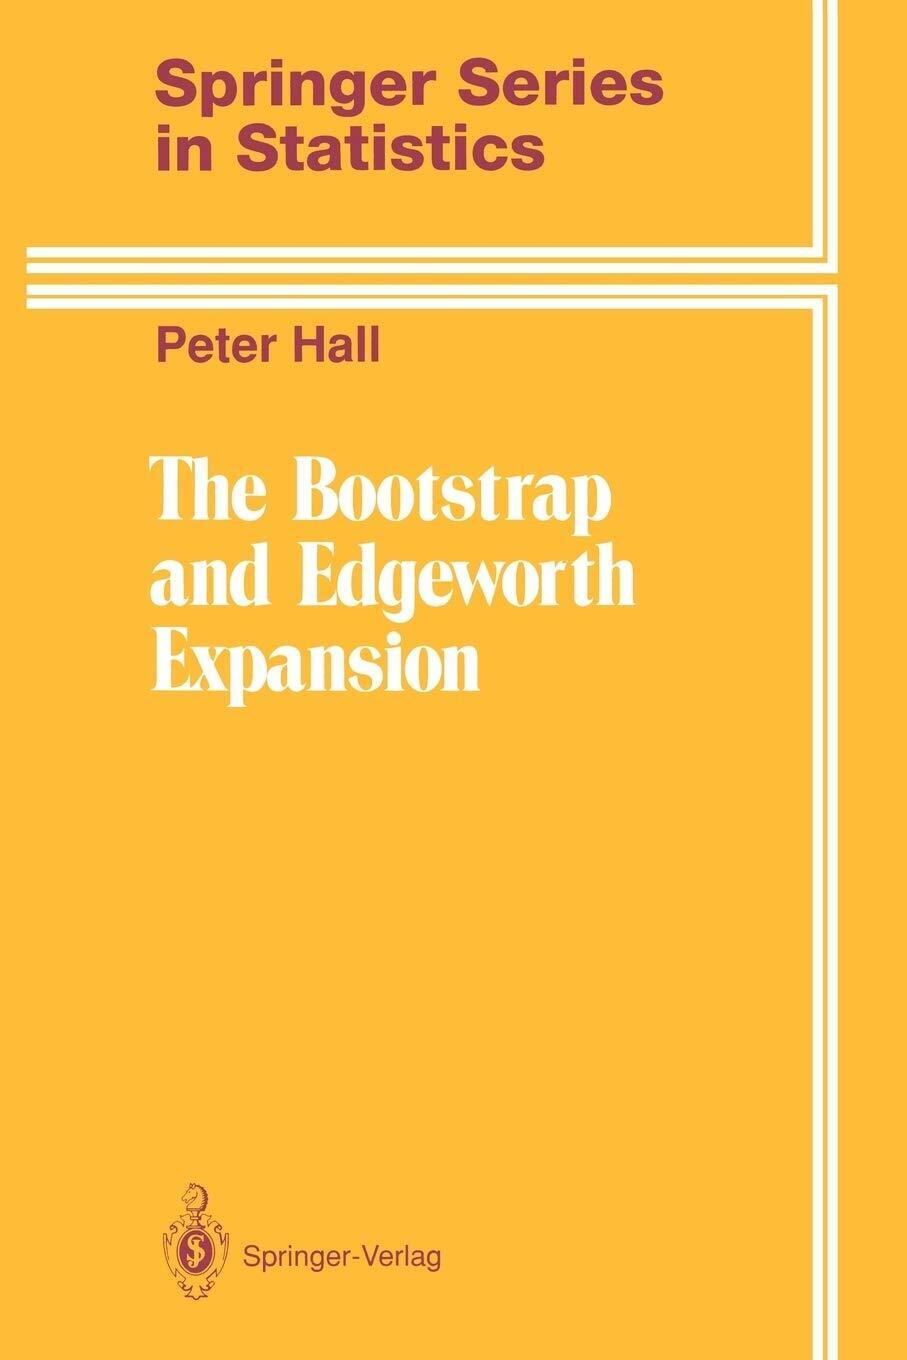 The Bootstrap and Edgeworth Expansion - Peter Hall - Springer, 1997 libro usato